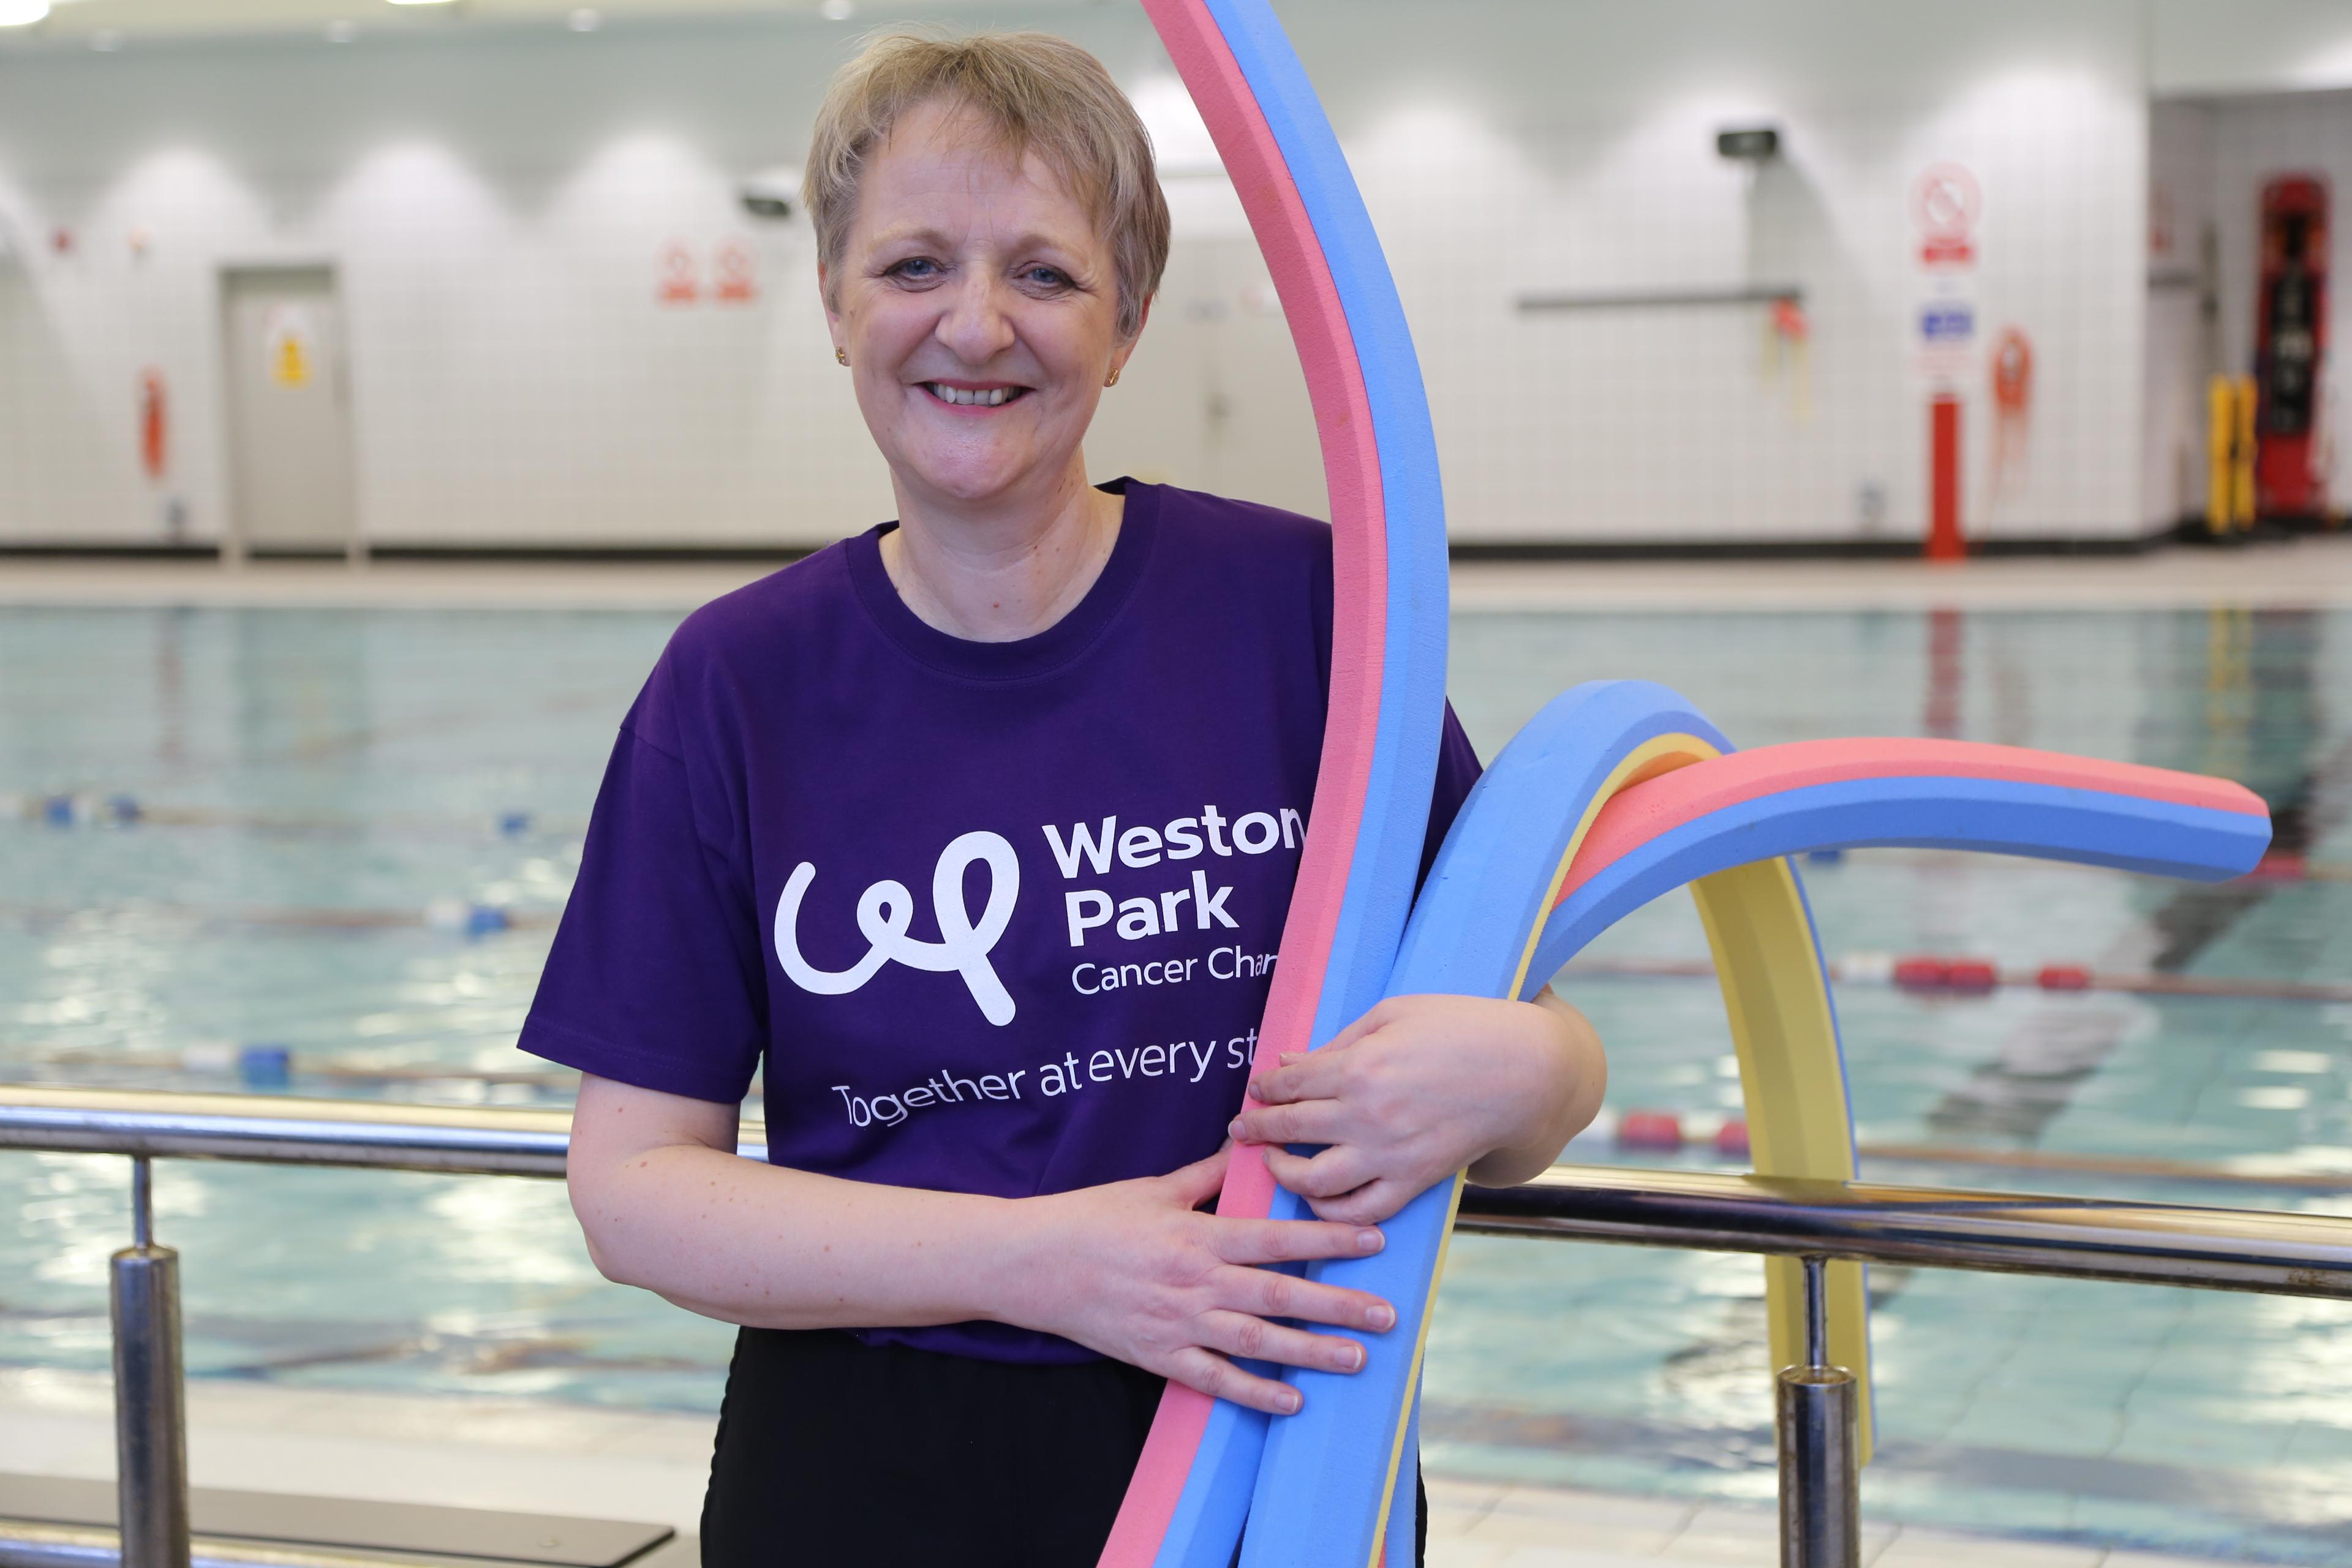 A smiling woman wearing a weston park cancer charity t shirt and holding swim aids is standing in front of a swimming pool